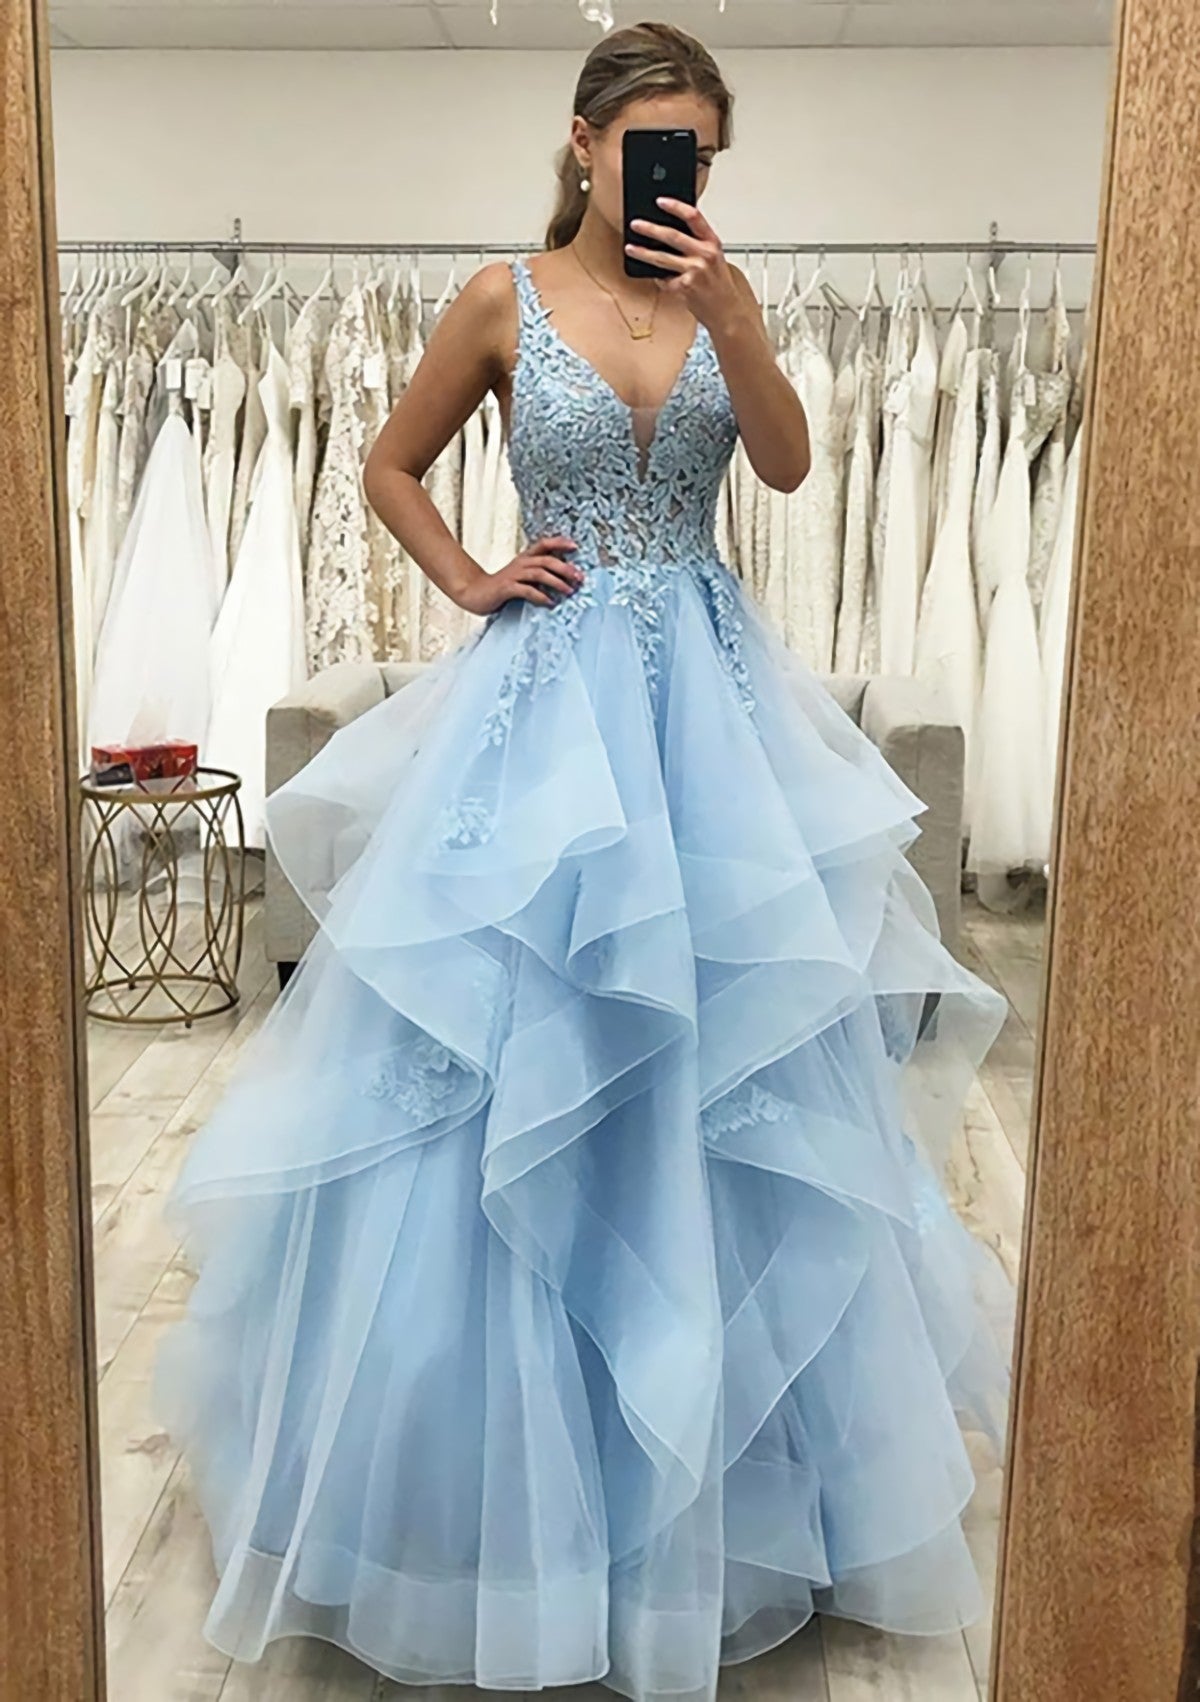 A Line V Neck Sleeveless Long Floor Length Tulle Satin Prom Dress With Lace Appliqued